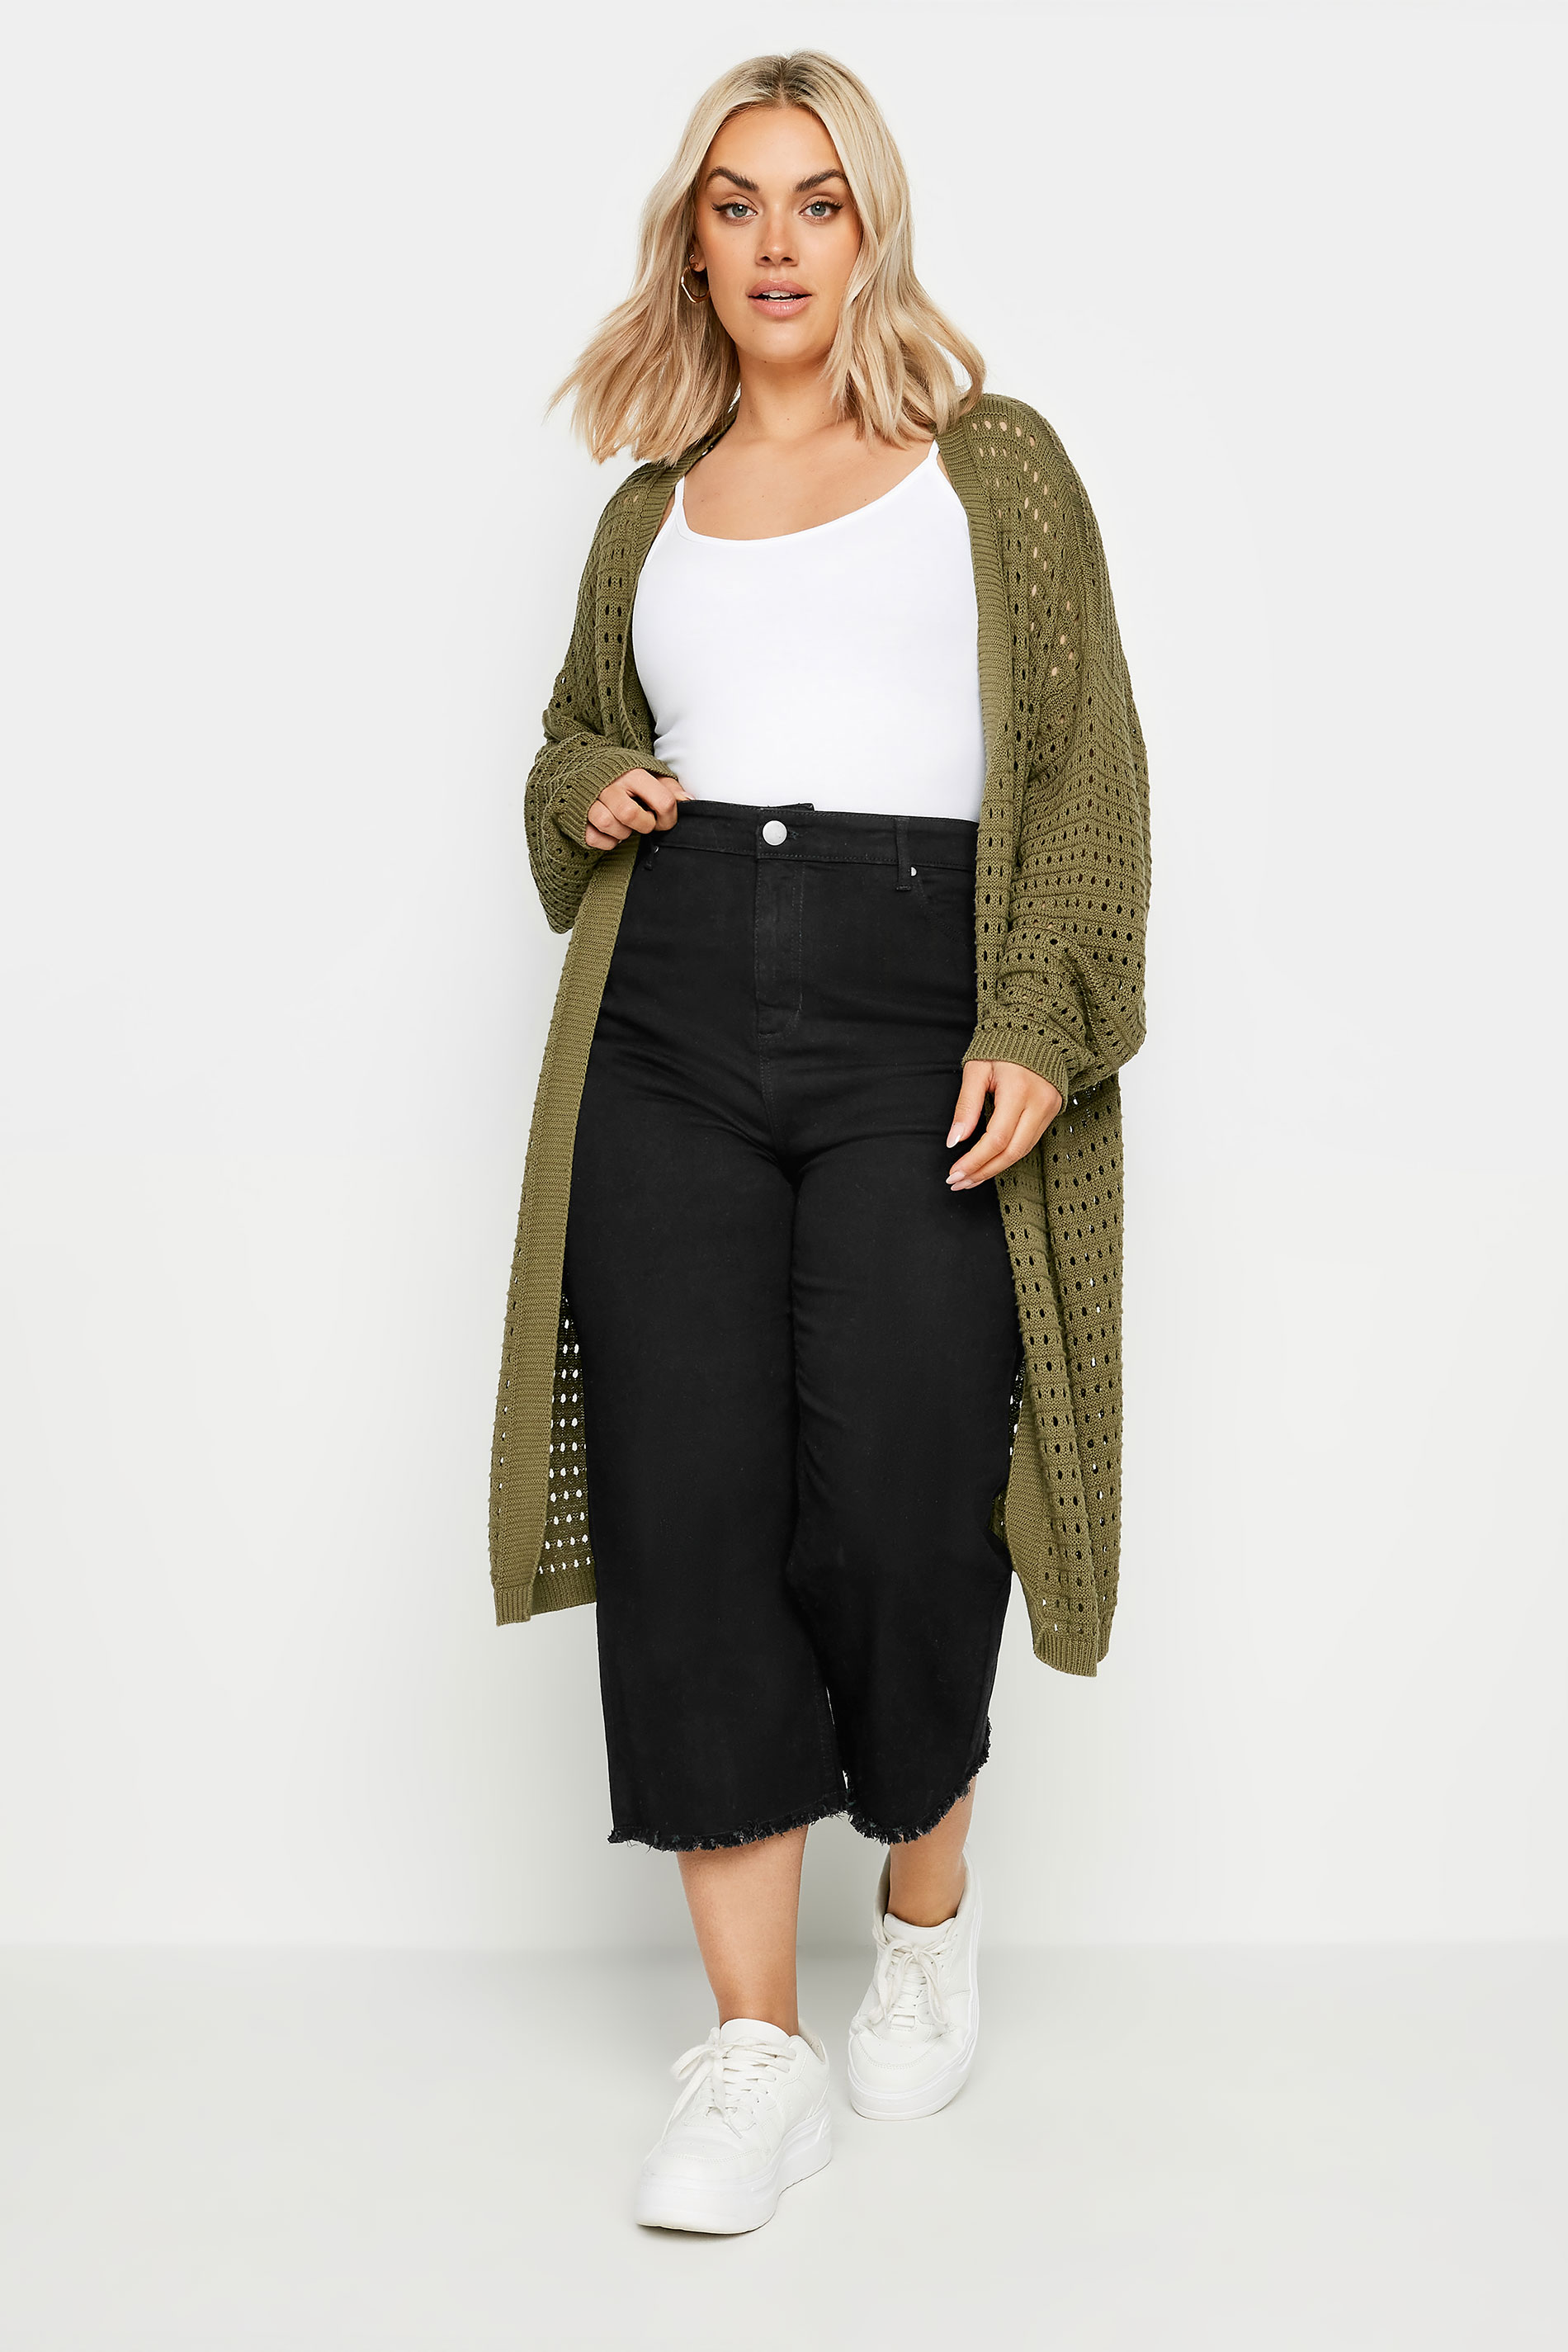 Plus Size Black Stretch Wide Leg Cropped Jeans | Yours Clothing 1